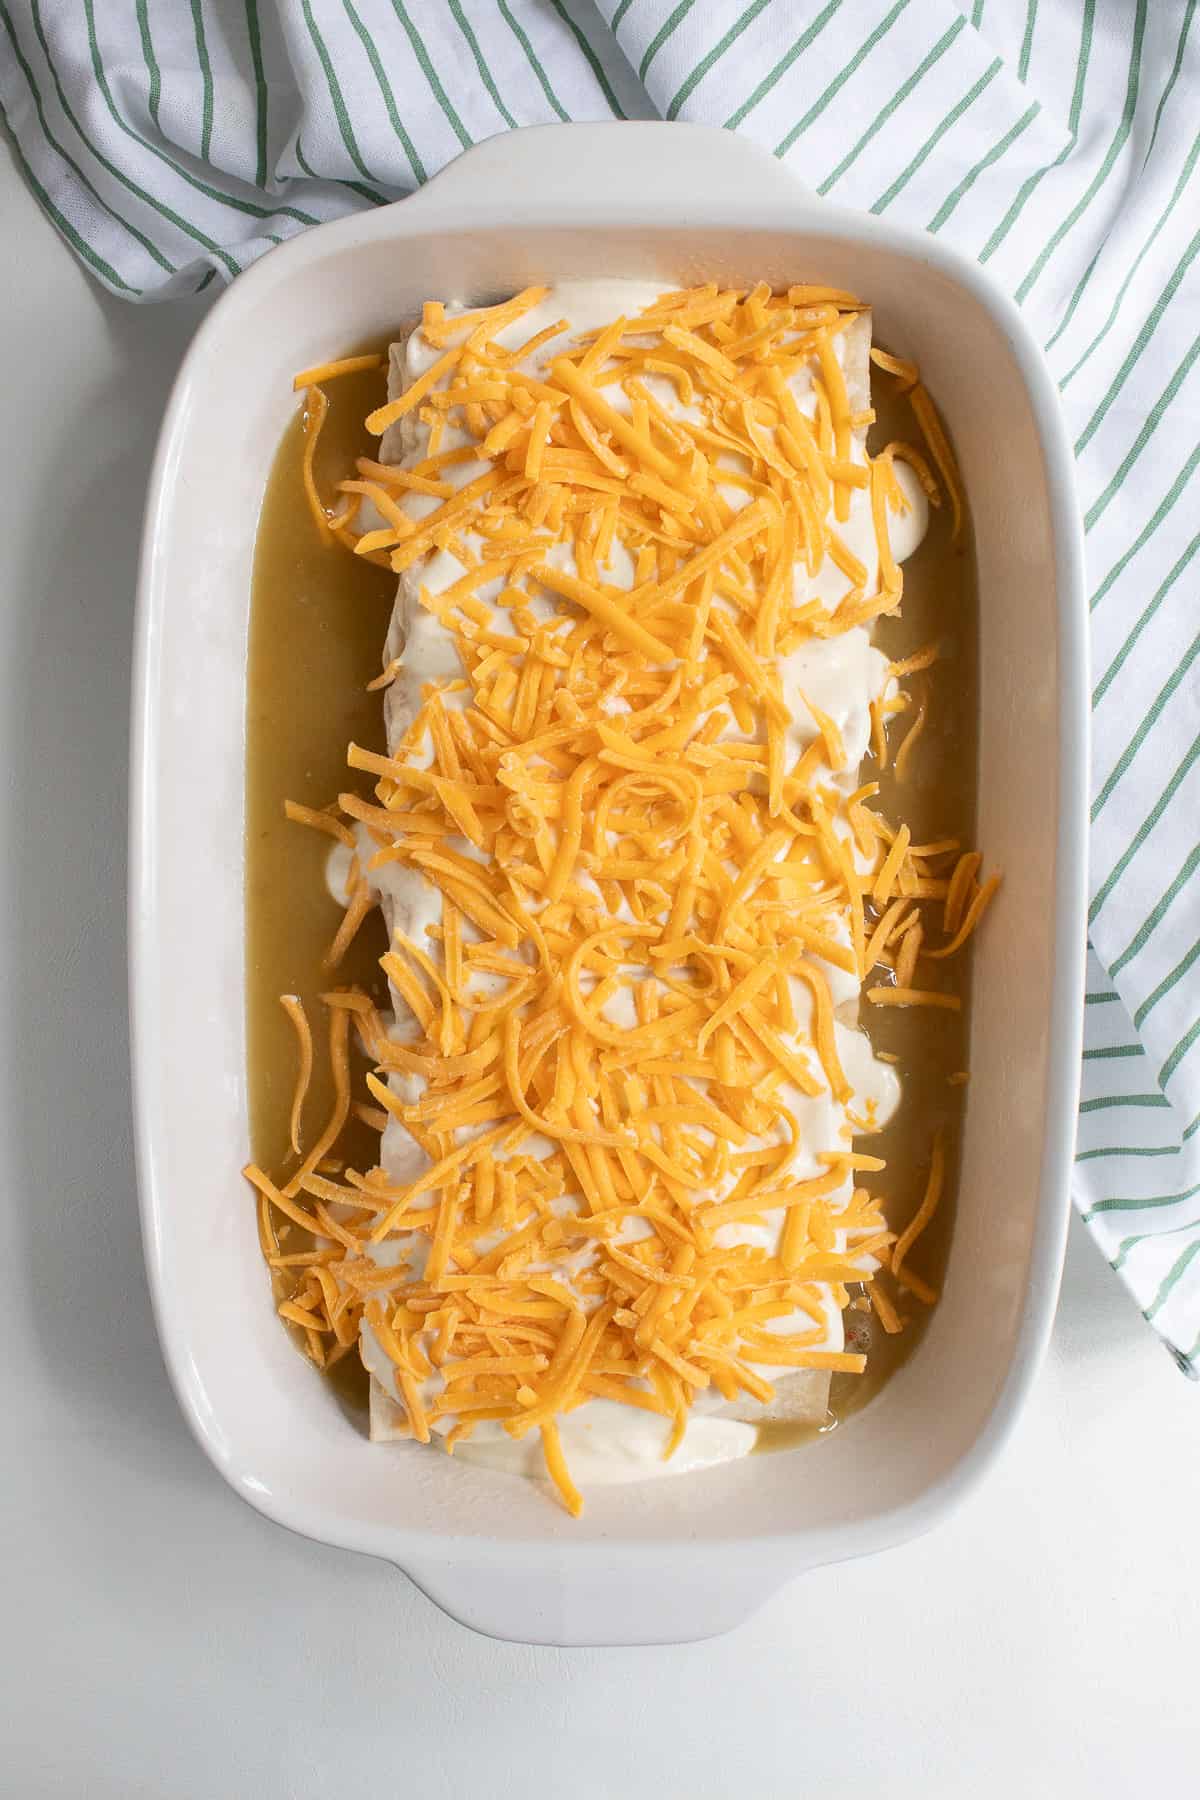 Cheese is sprinkled over the top of the sour cream layer on the burritos.